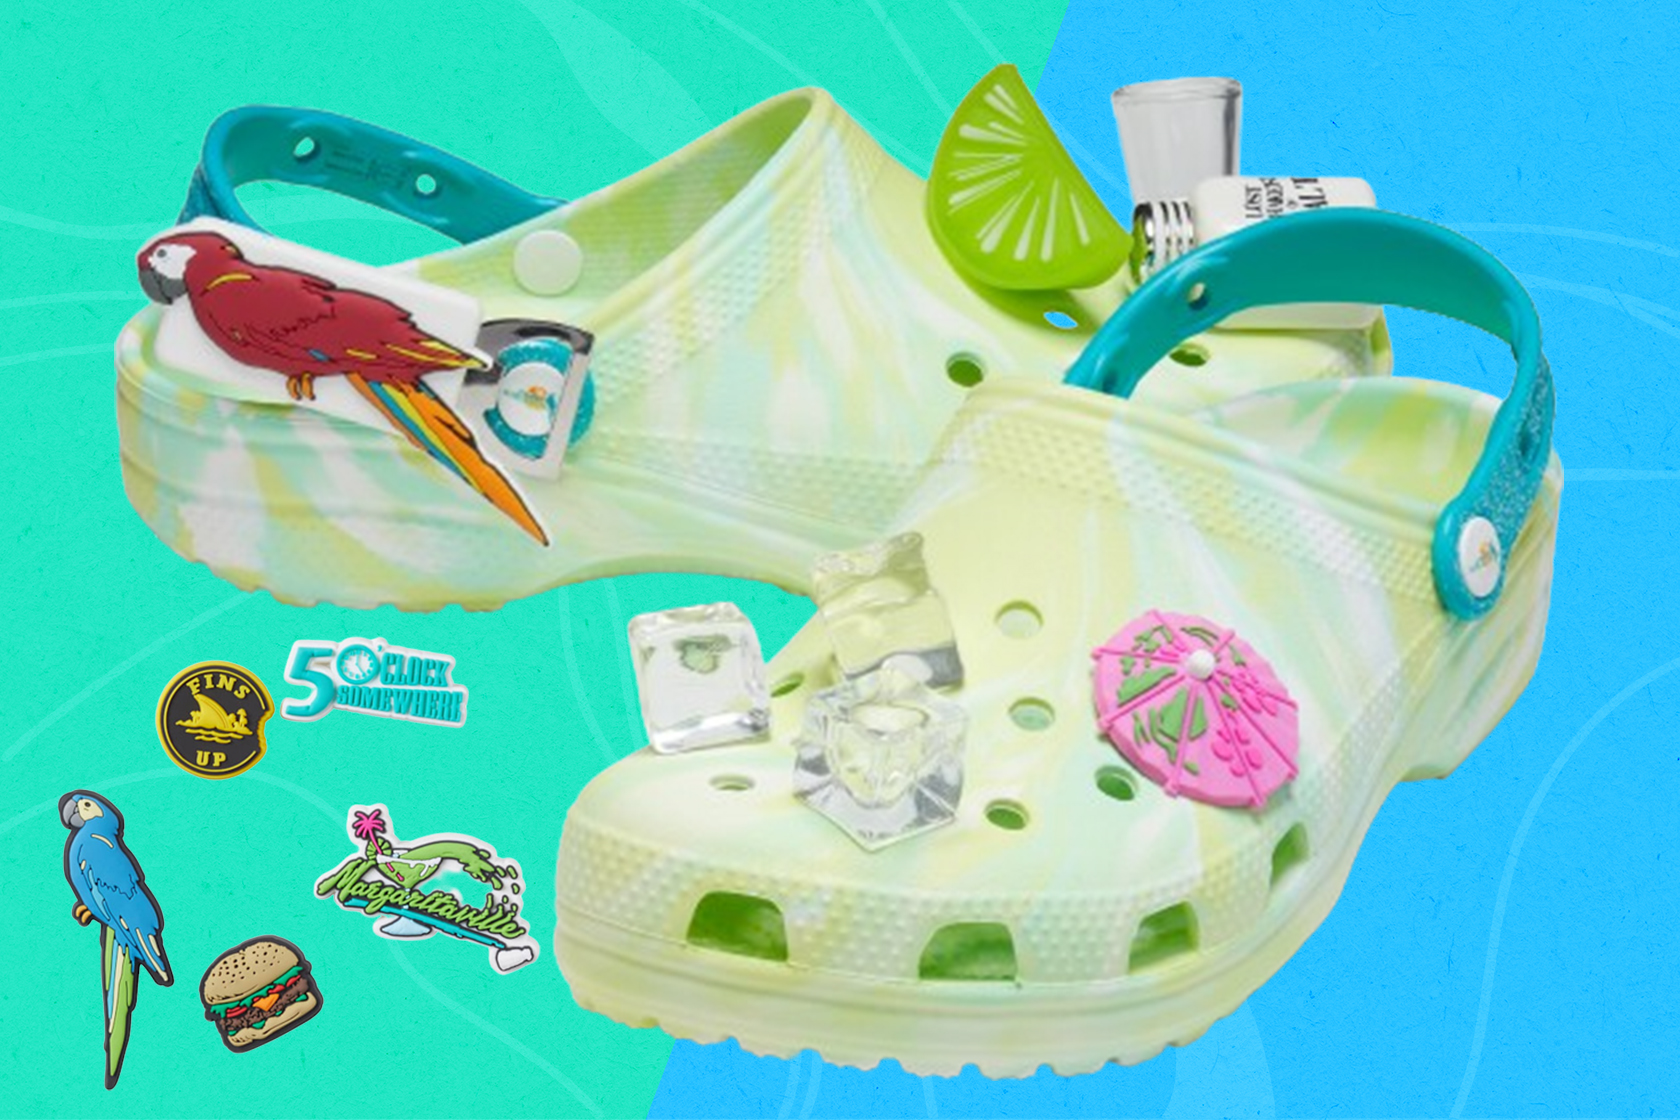 Margaritaville Crocs restock: Shop now before TikTok sells these out